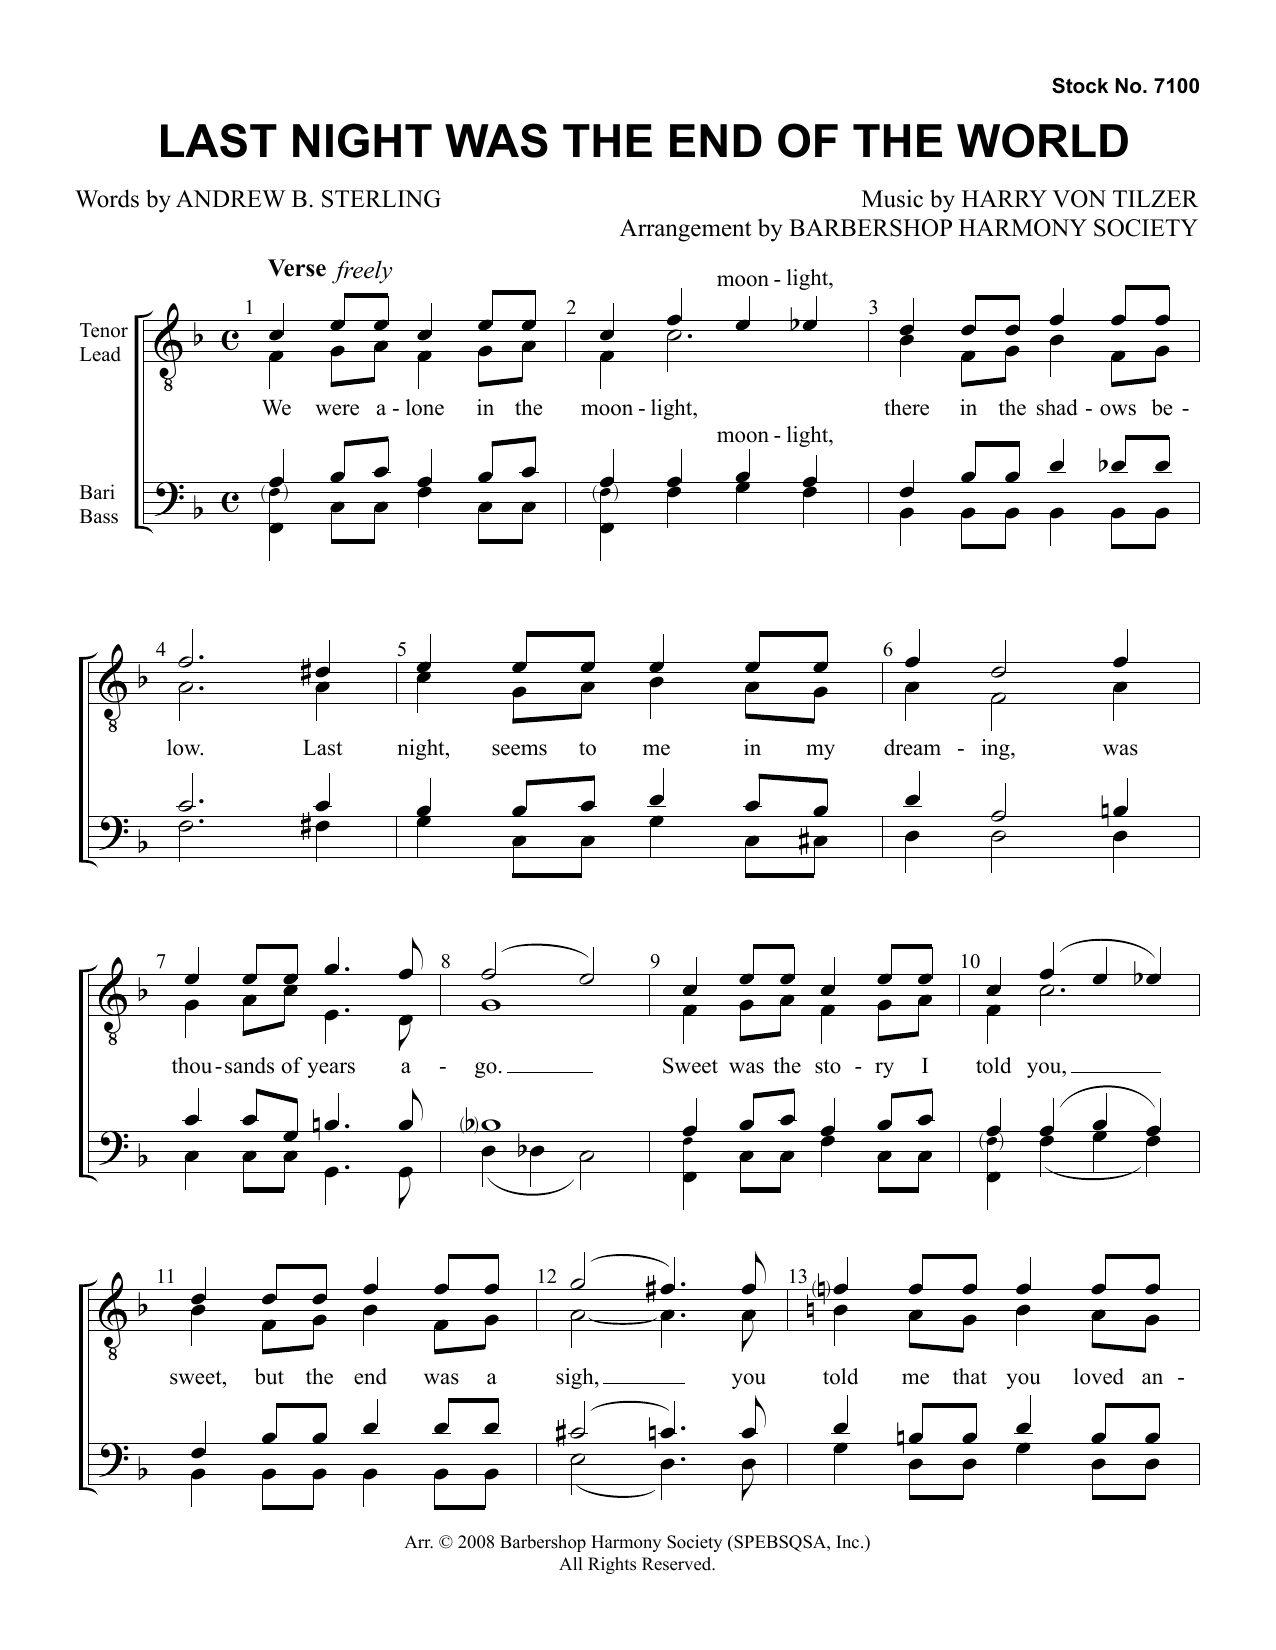 Download Andrew B. Sterling & Harry von Tilze Last Night Was The End Of The World (ar Sheet Music